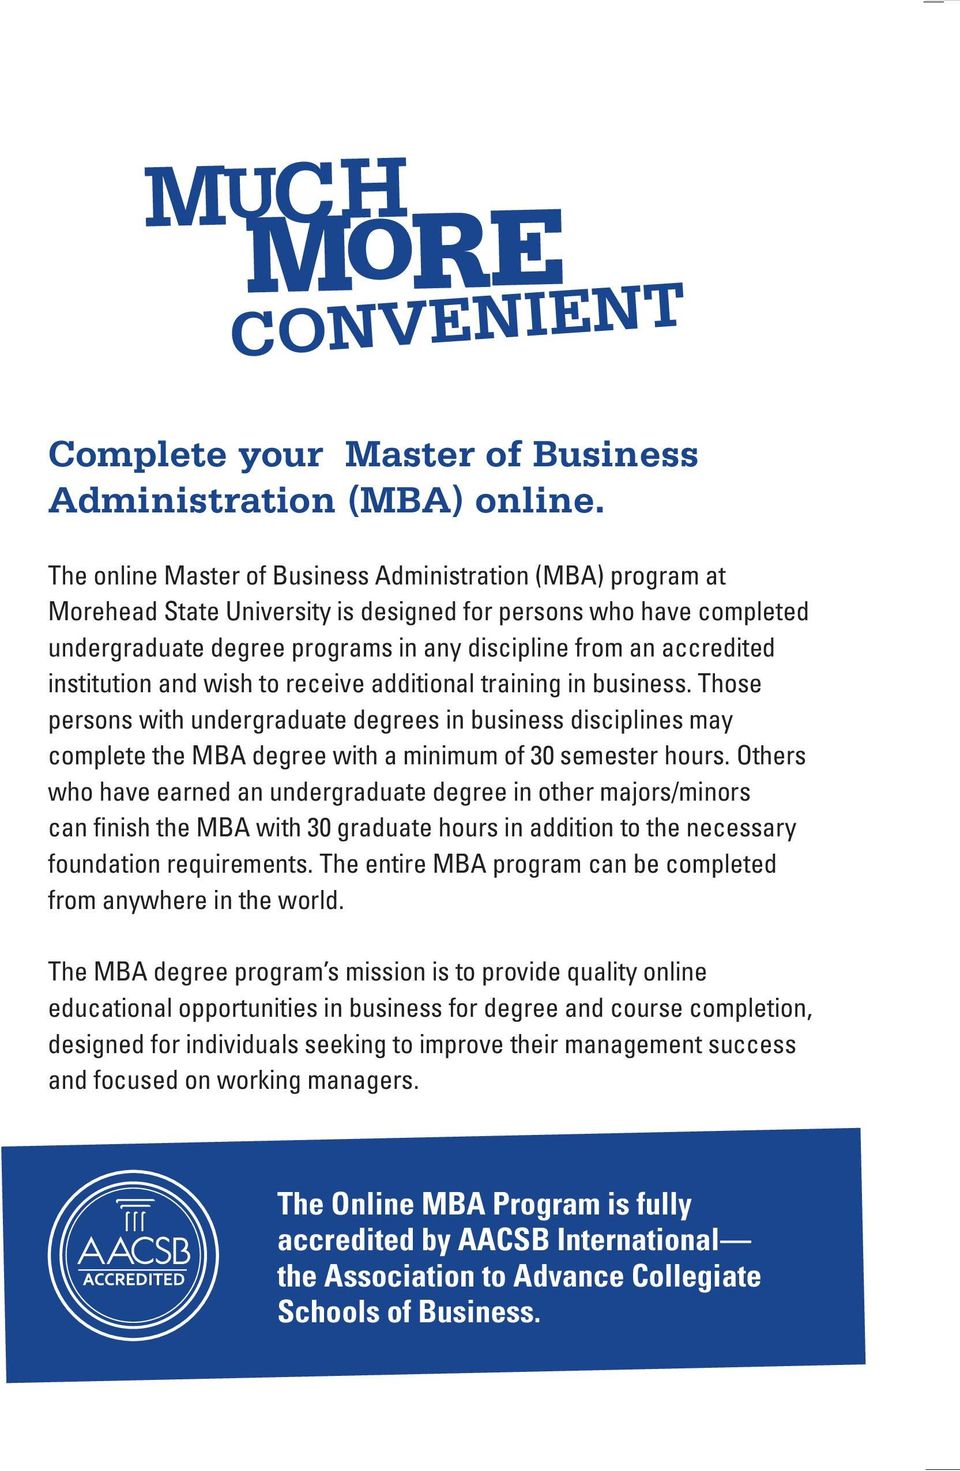 institution and wish to receive additional training in business. Those persons with undergraduate degrees in business disciplines may complete the MBA degree with a minimum of 30 semester hours.